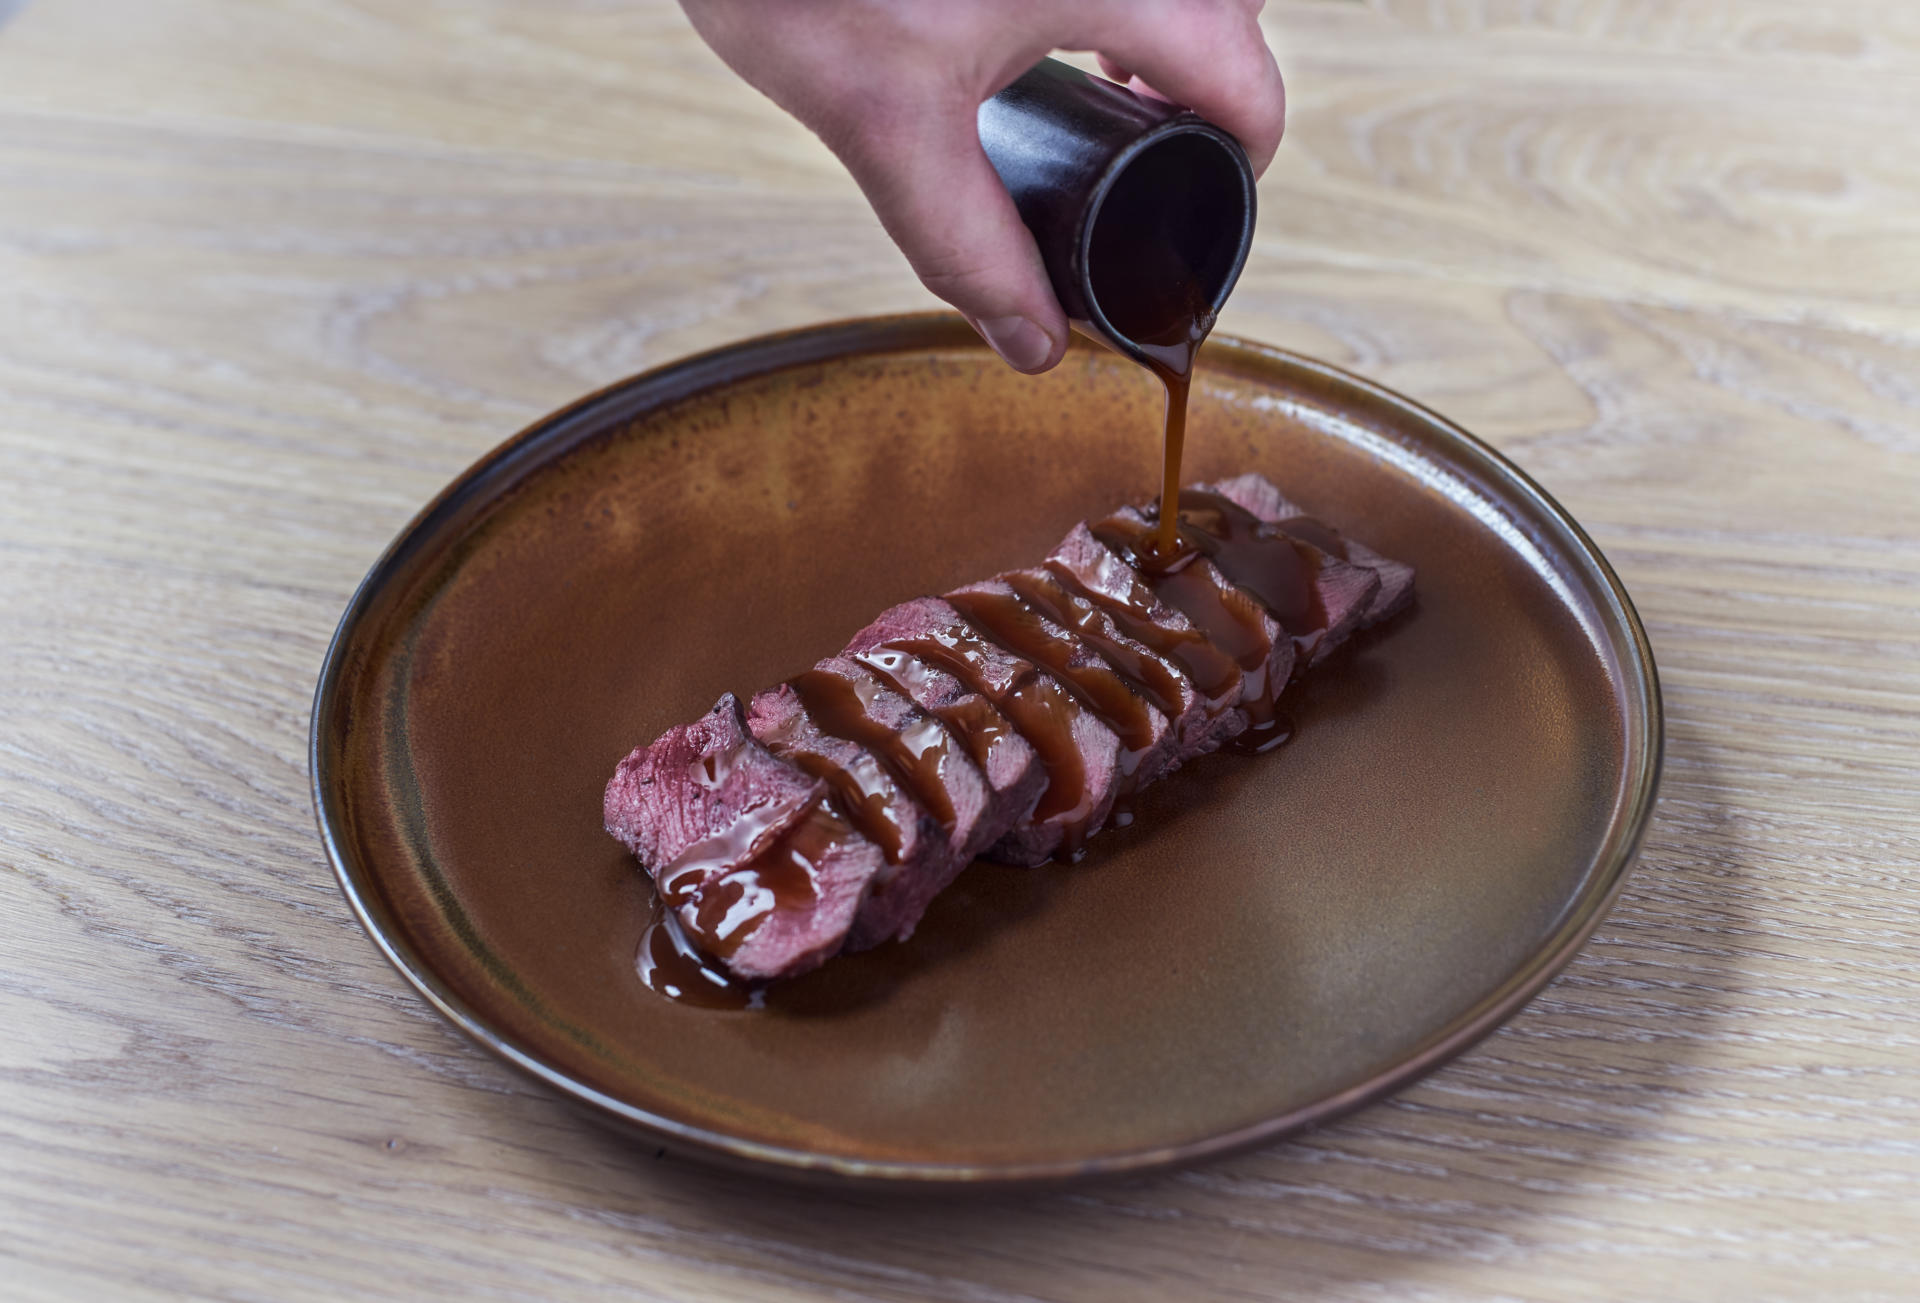 The hand of a server pours steak sauce over slices of beef arrayed on a decorative plate on a neutral wood background